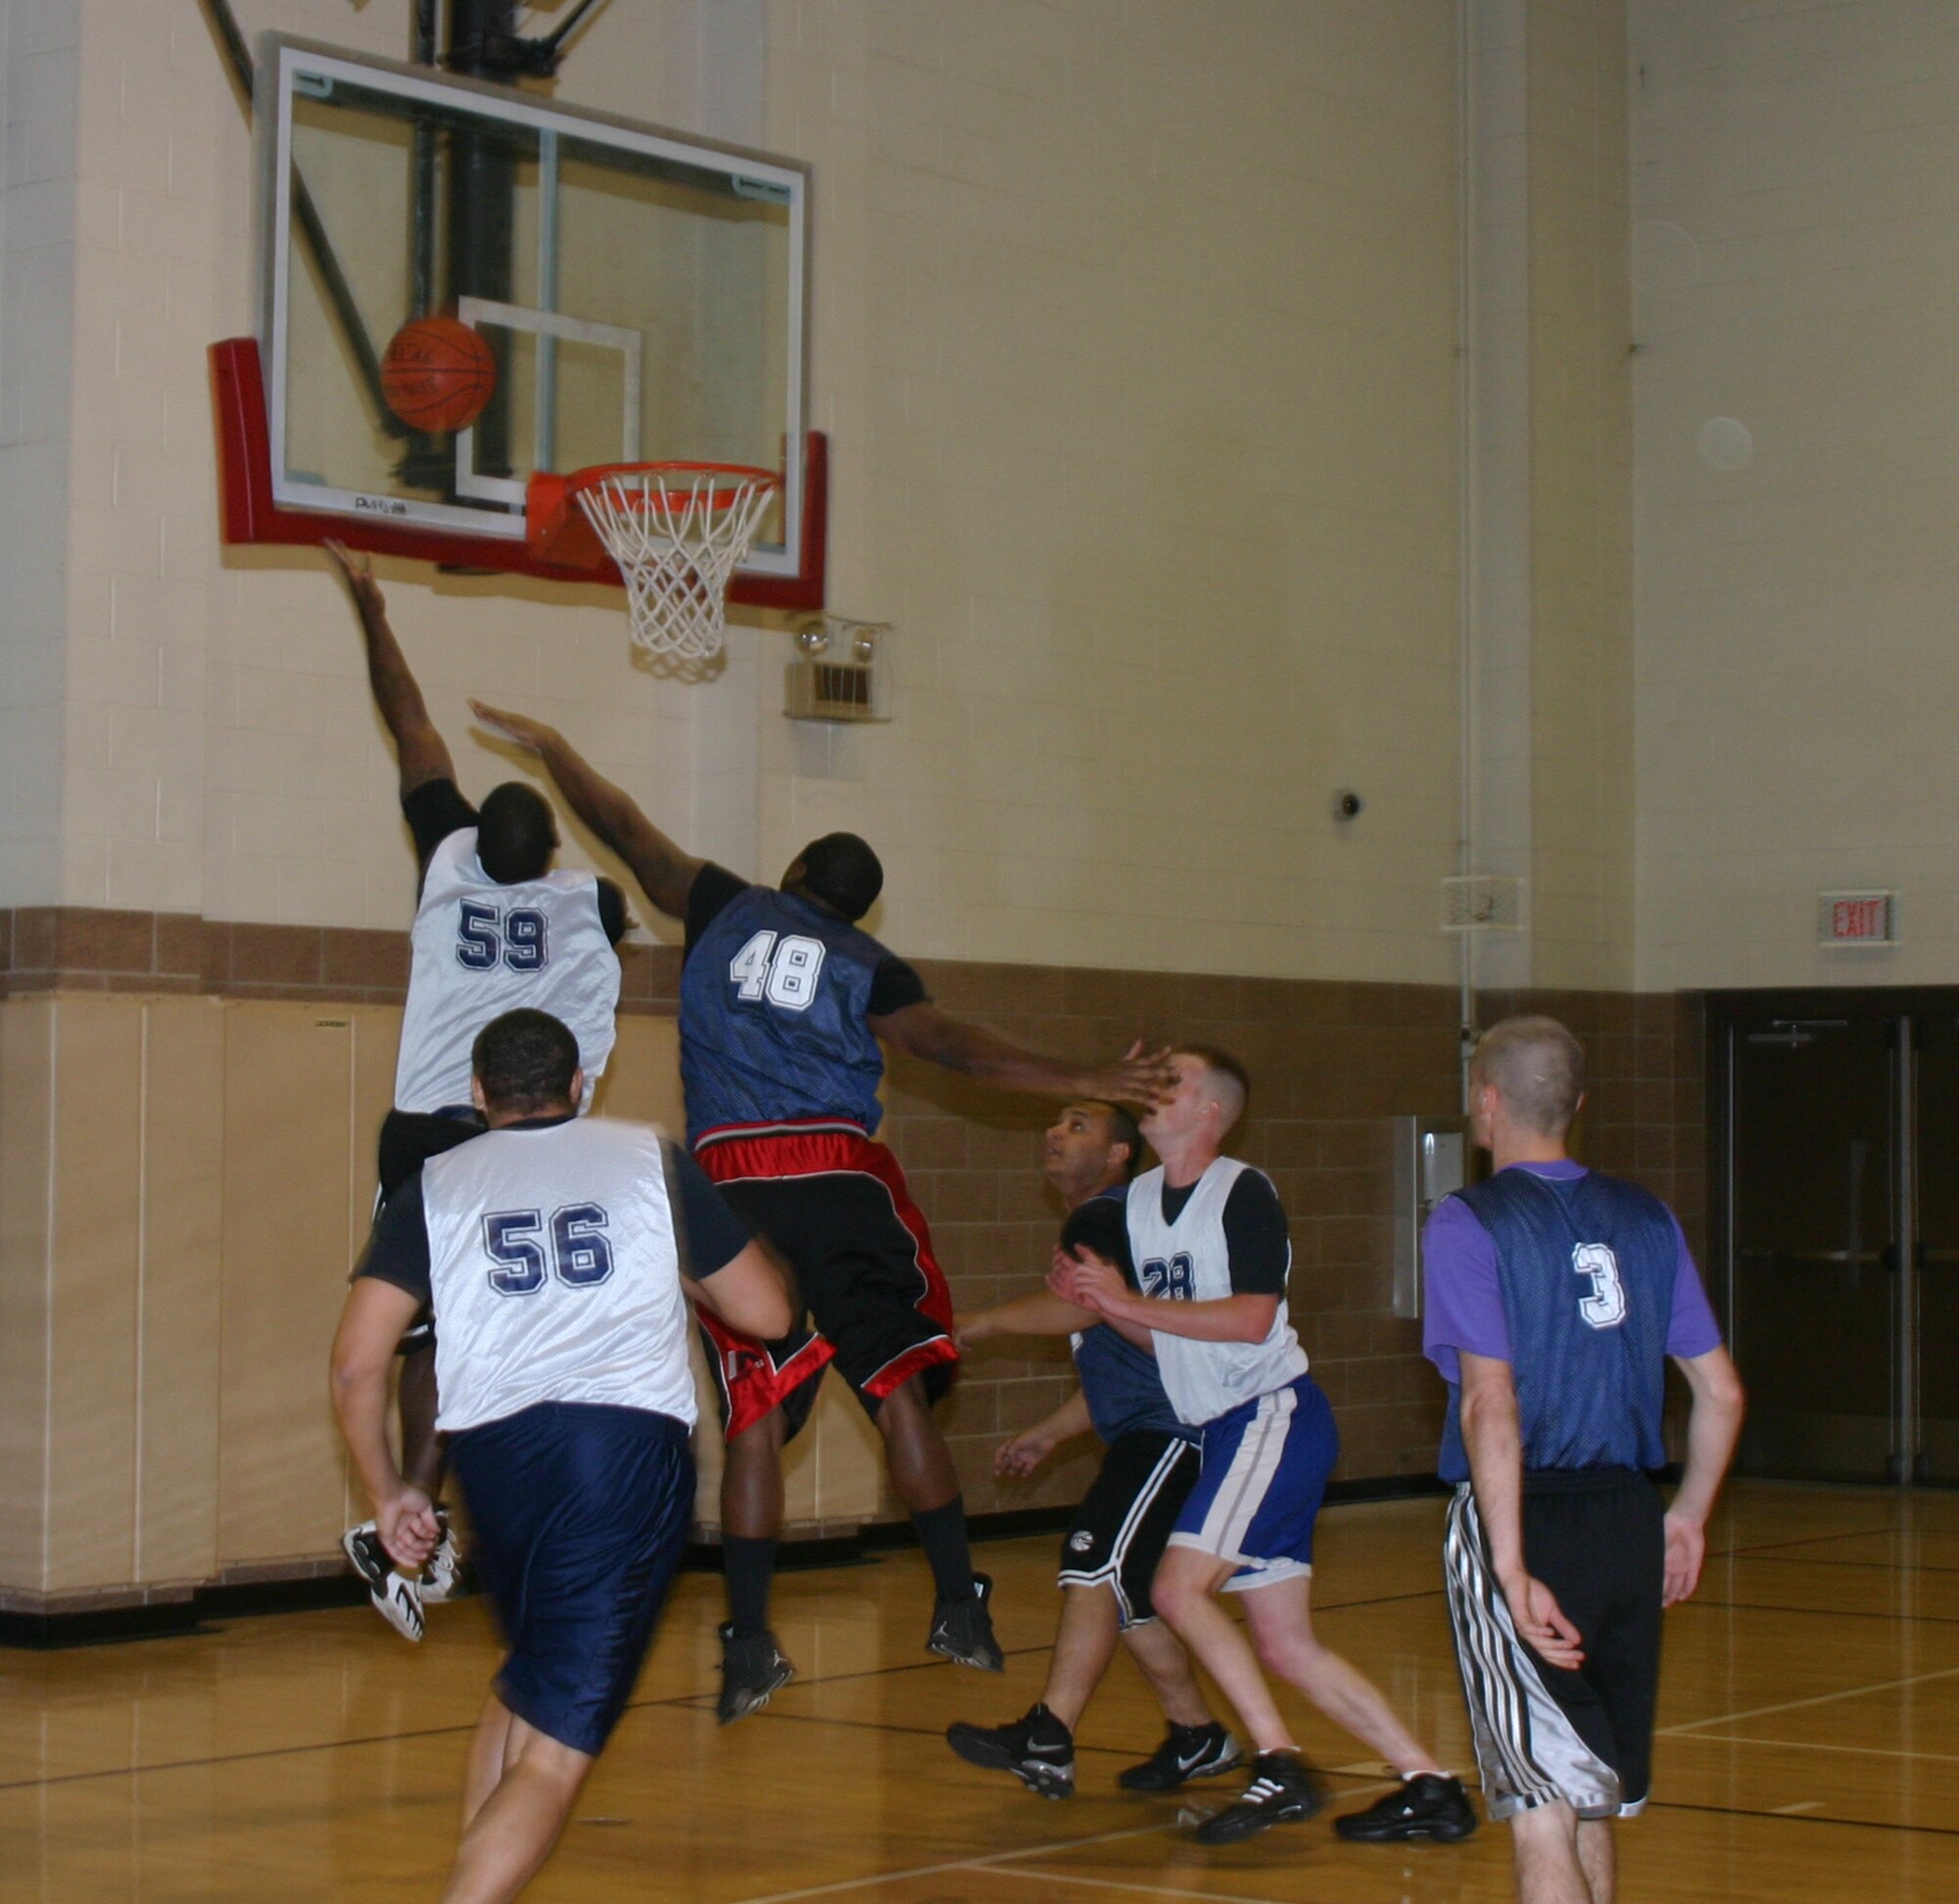 Members of the 82nd Security Forces Squadron Cops and the 82nd Communications Squadron intramural basketball teams jump for a rebound in their game Tuesday night at the Levitow Fitness Center. (U.S. Air Force photo/Airman Jacob Corbin.)